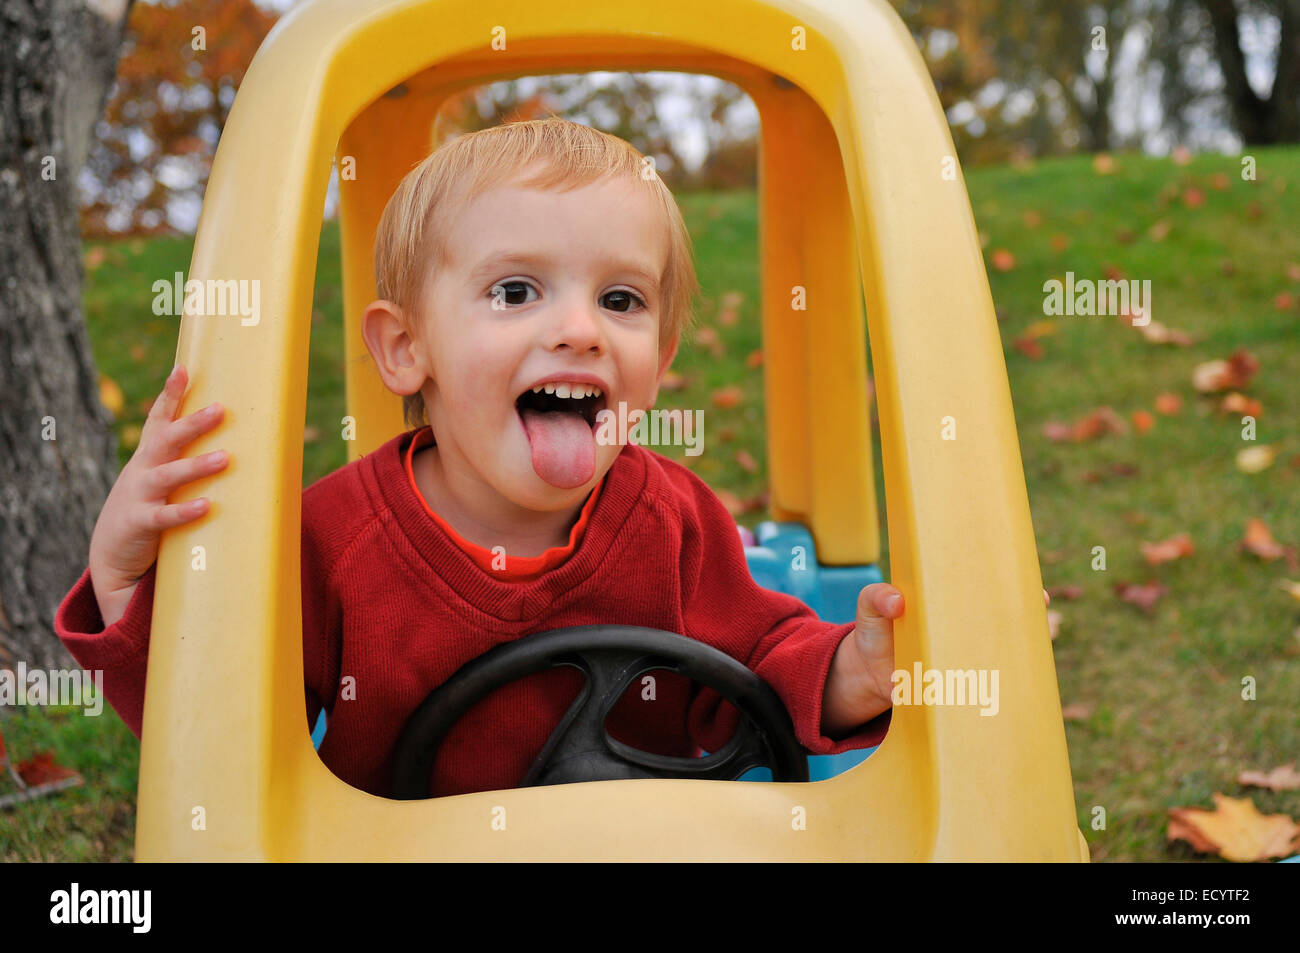 A two-year-old boy makes a funny face while playing in his toy car on an autumn day. Stock Photo